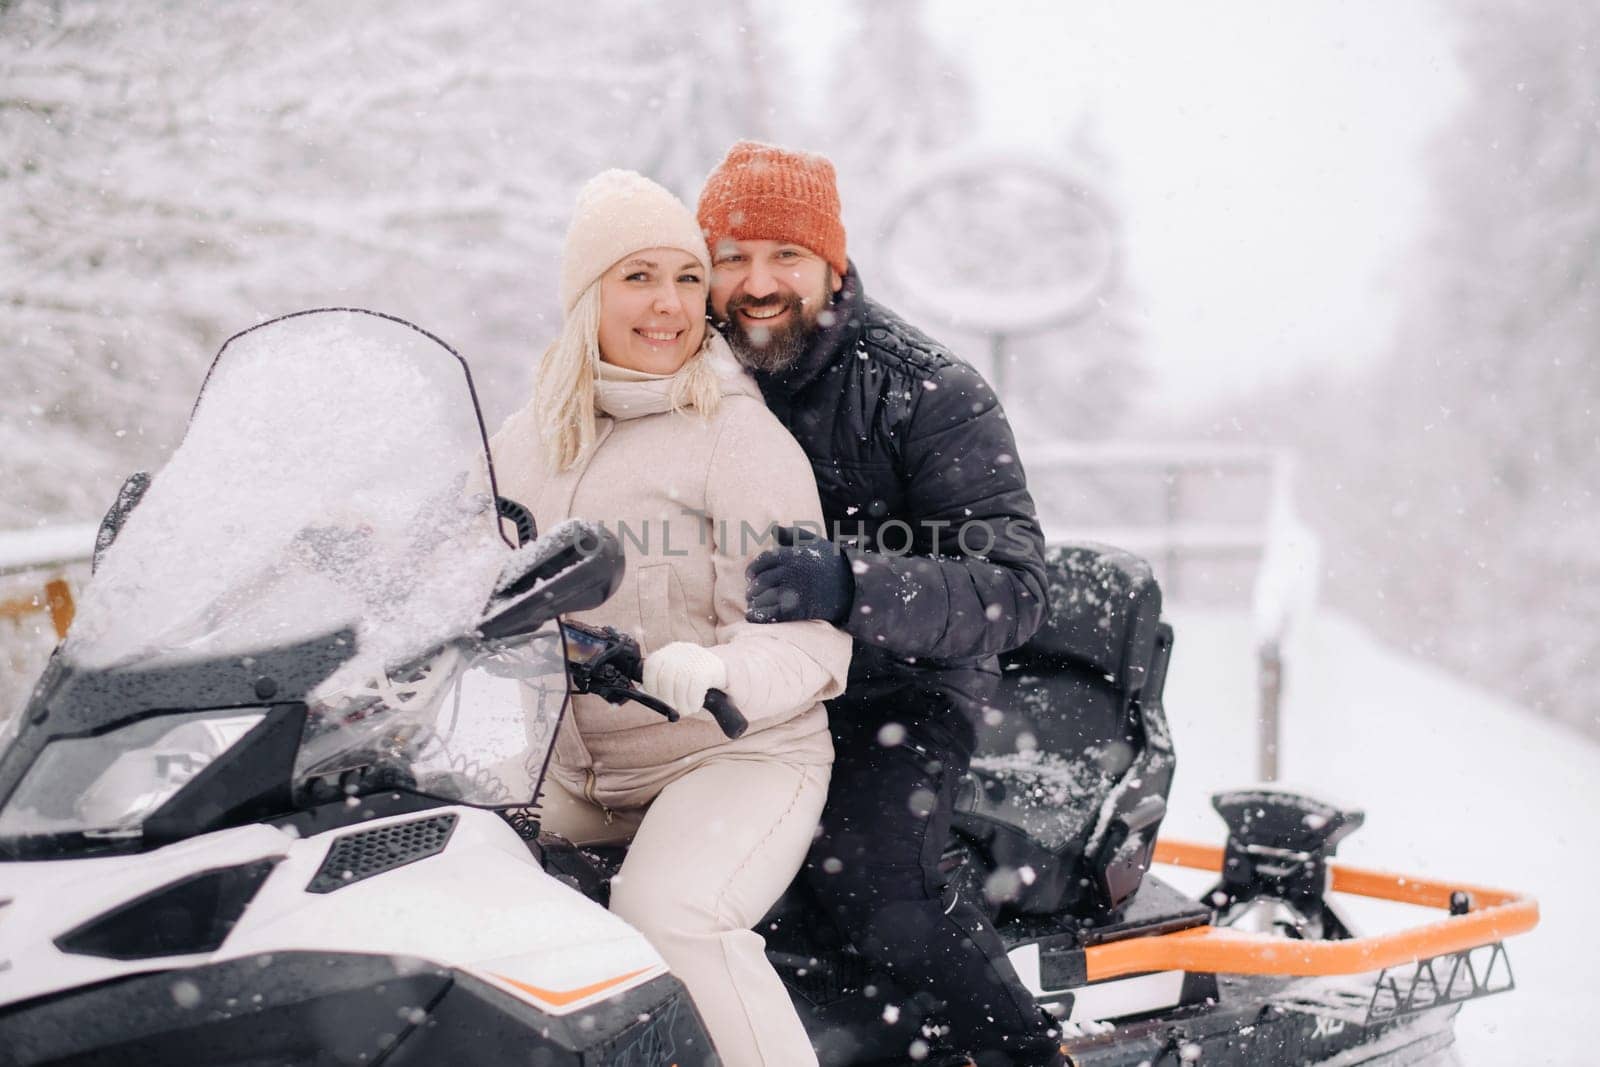 A couple, a man and a woman, on a snowmobile in a winter forest.